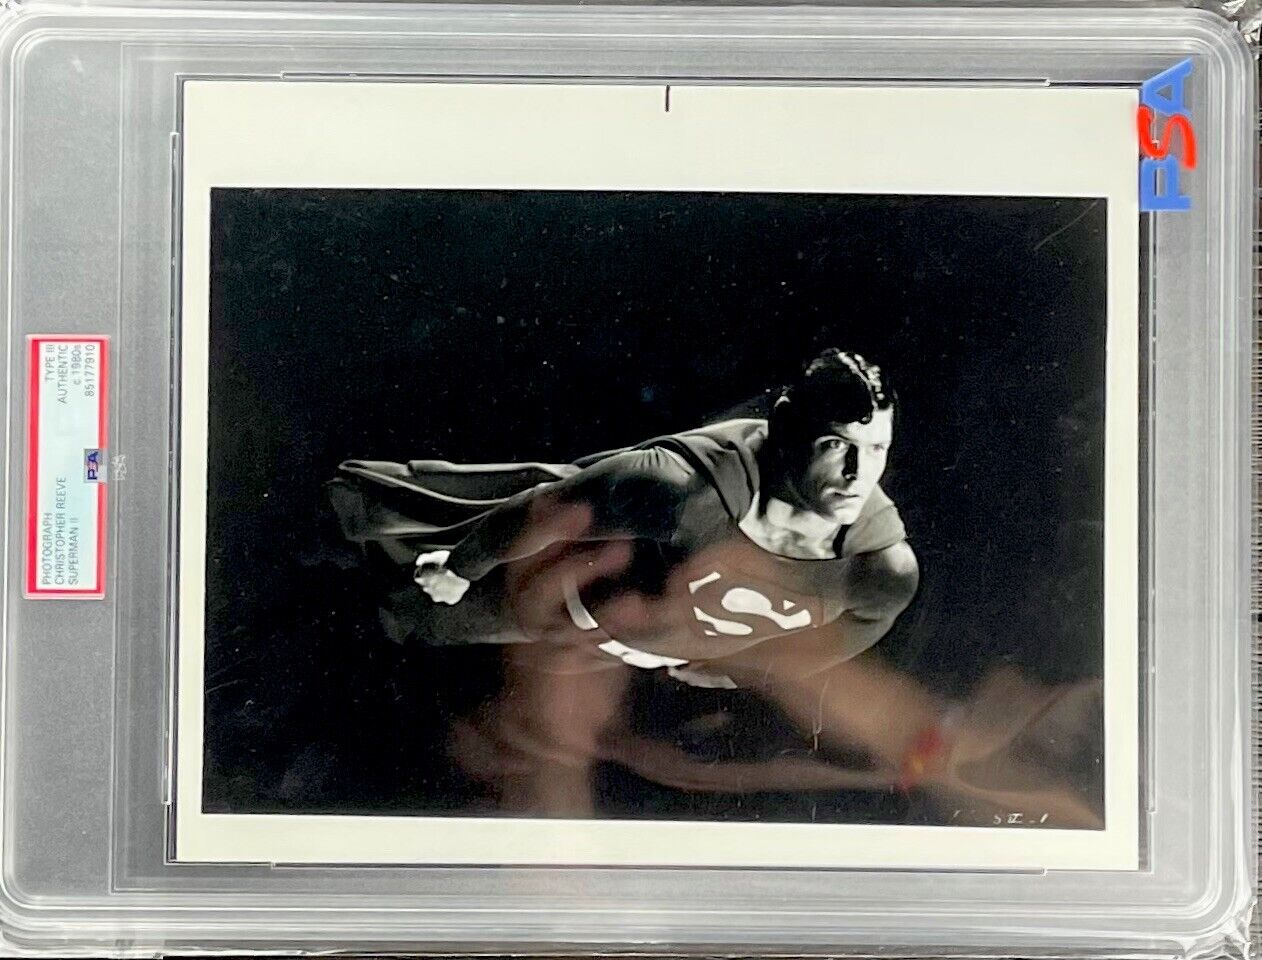 Superman 2 Christopher Reeve 1980 PSA Authentic Type 3l Photo Warner Brothers